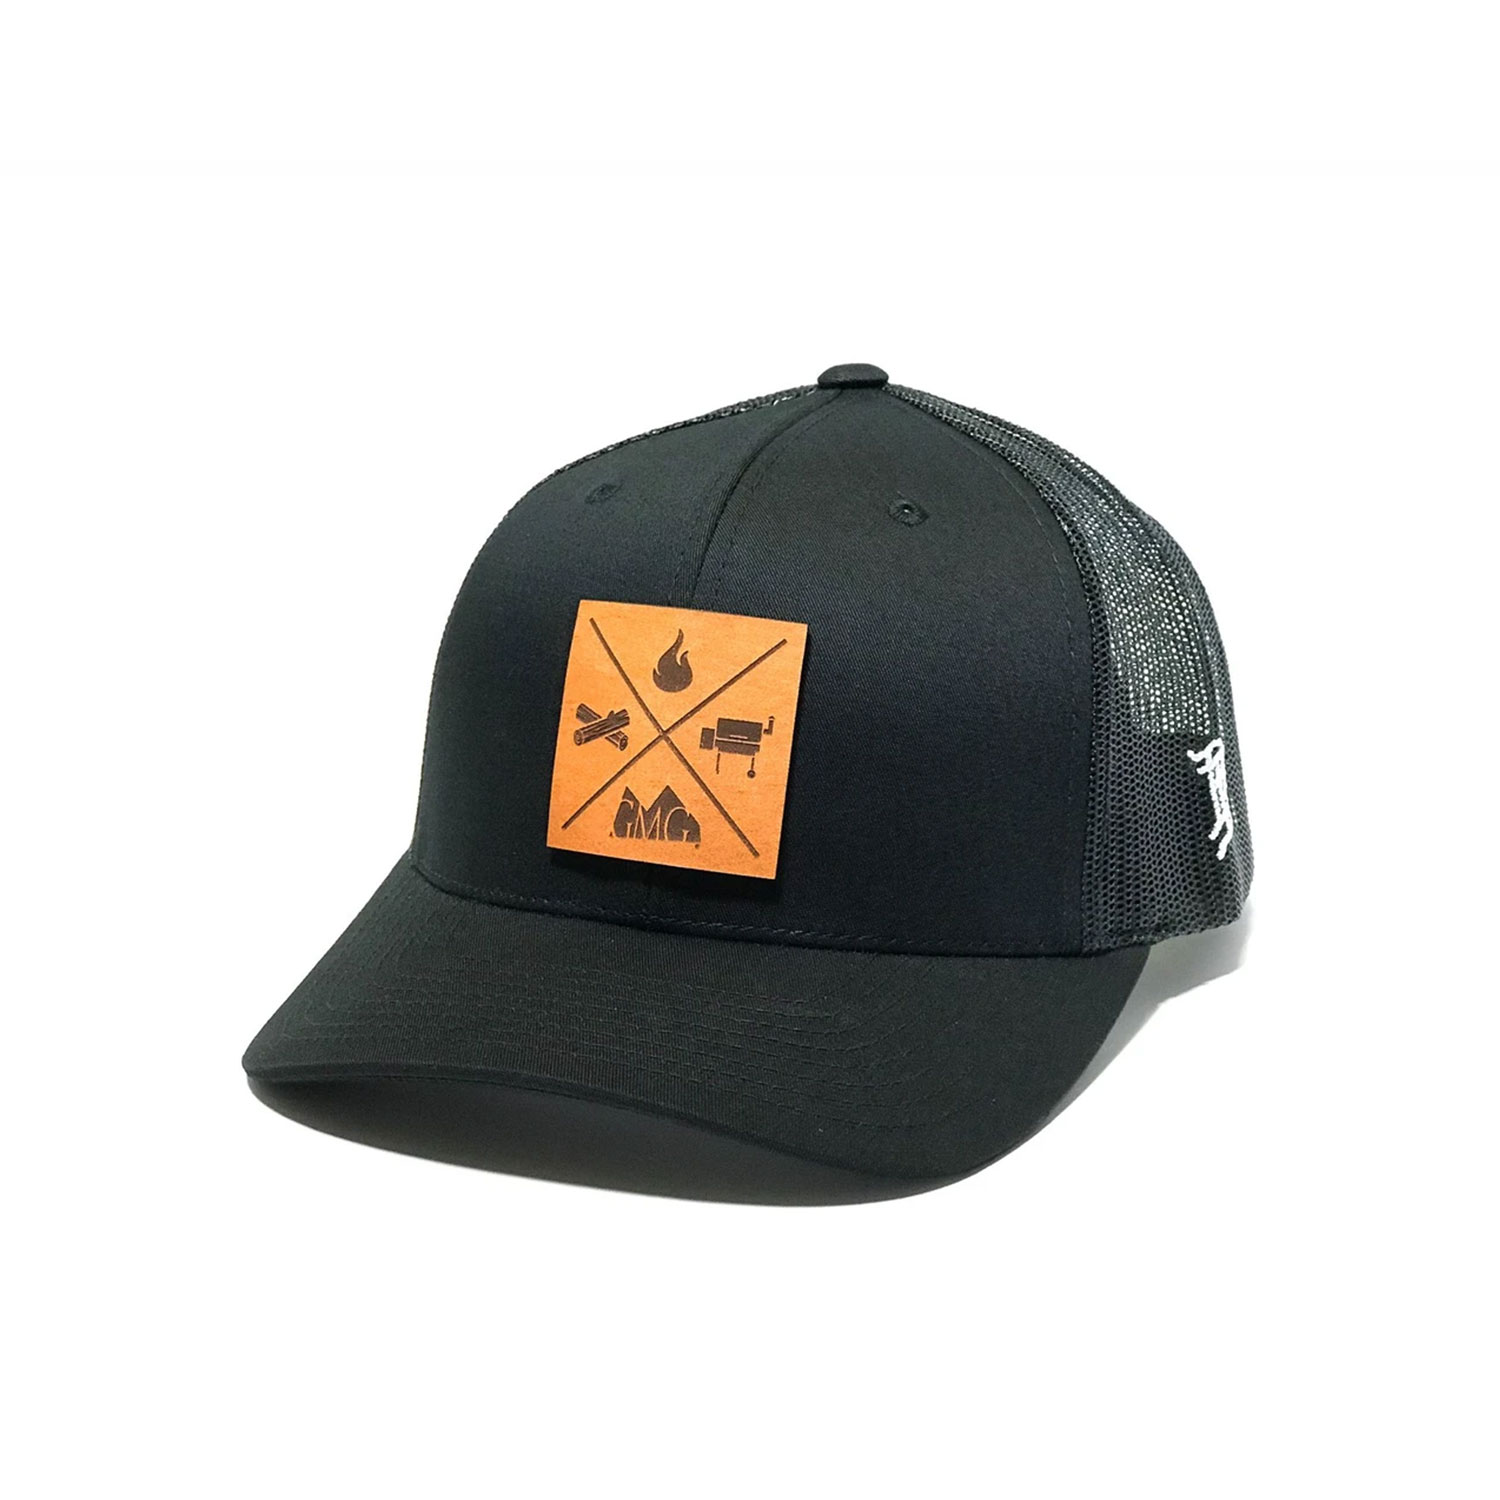 GMG BLACK TRUCKER HAT W/ LEATHER PATCH